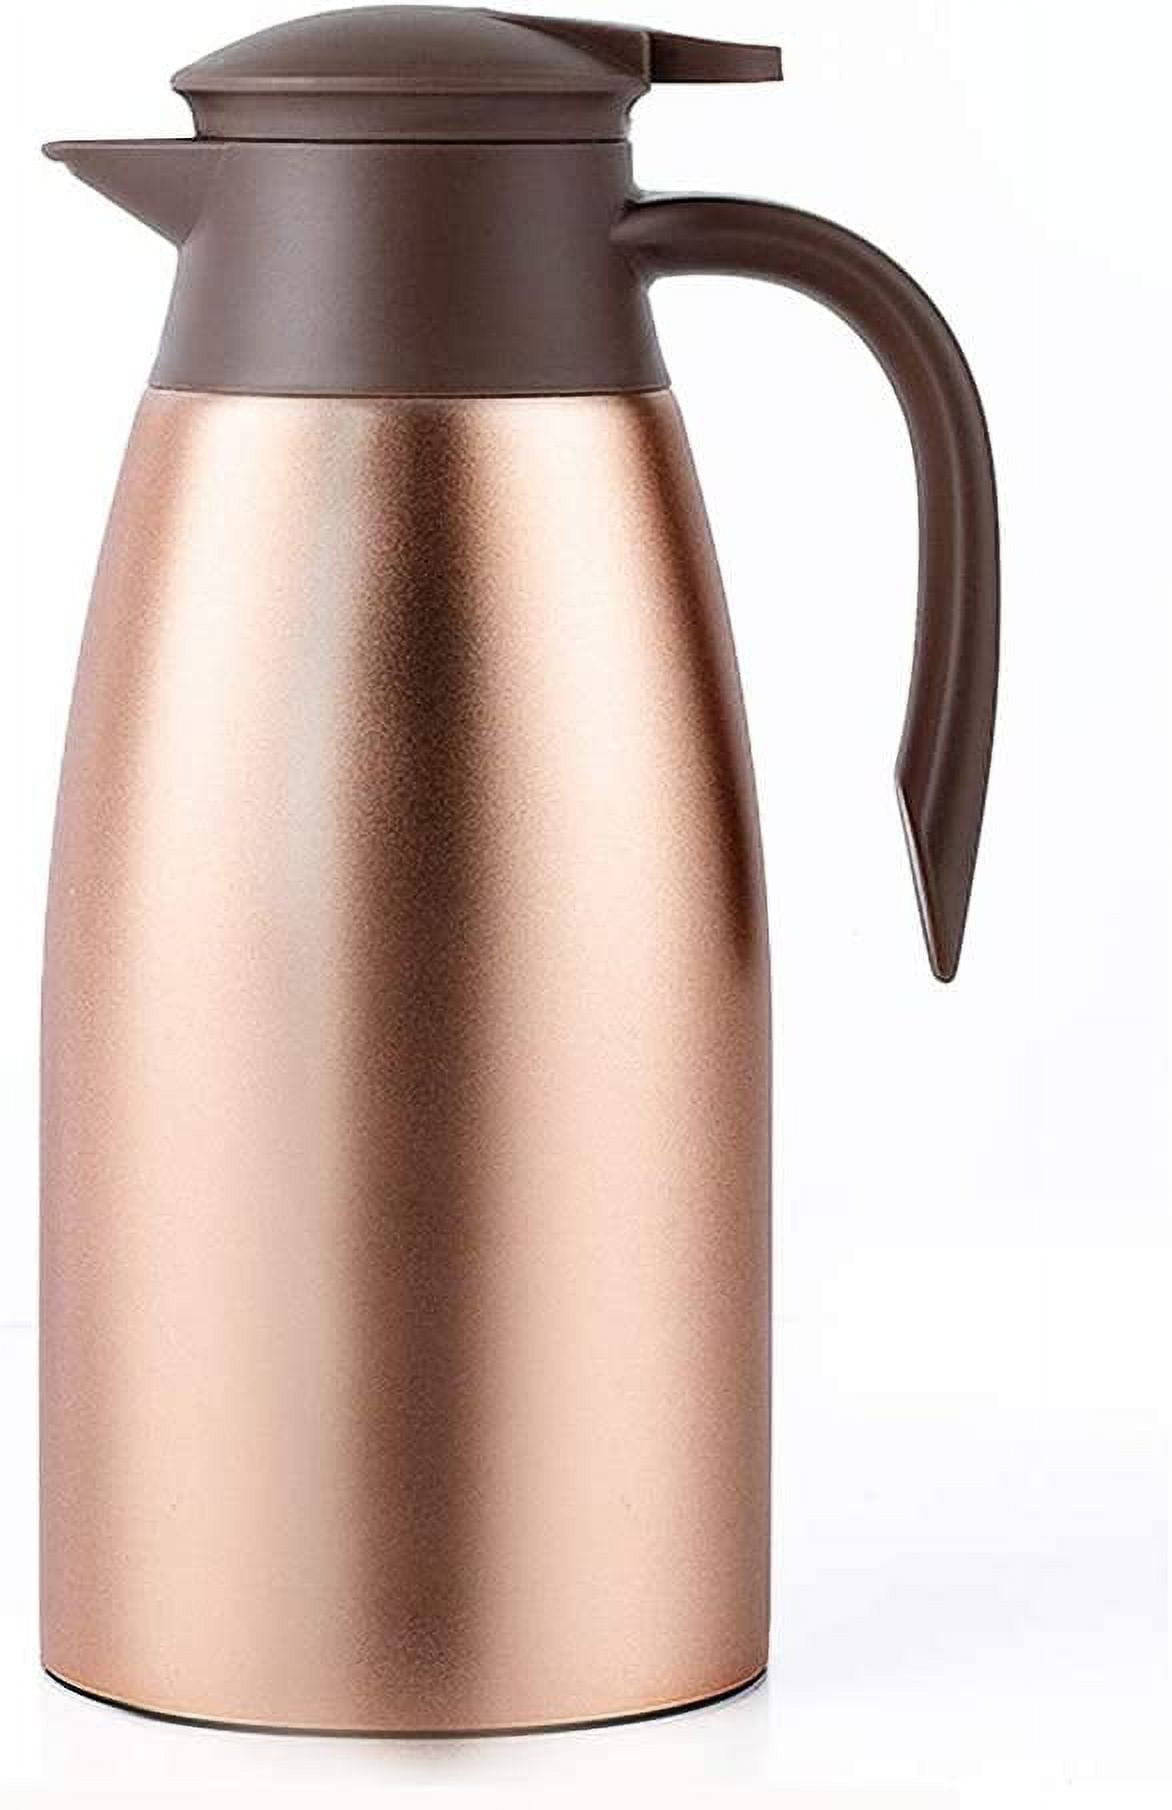  Soopot Thermal Coffee Carafe, 68Oz Coffee Dispenser, Airpot  Coffee Dispenser with Pump,Stainless Steel Insulated Flask 12-14 Hours Heat  Retention 12 Hours Cold Retention: Home & Kitchen